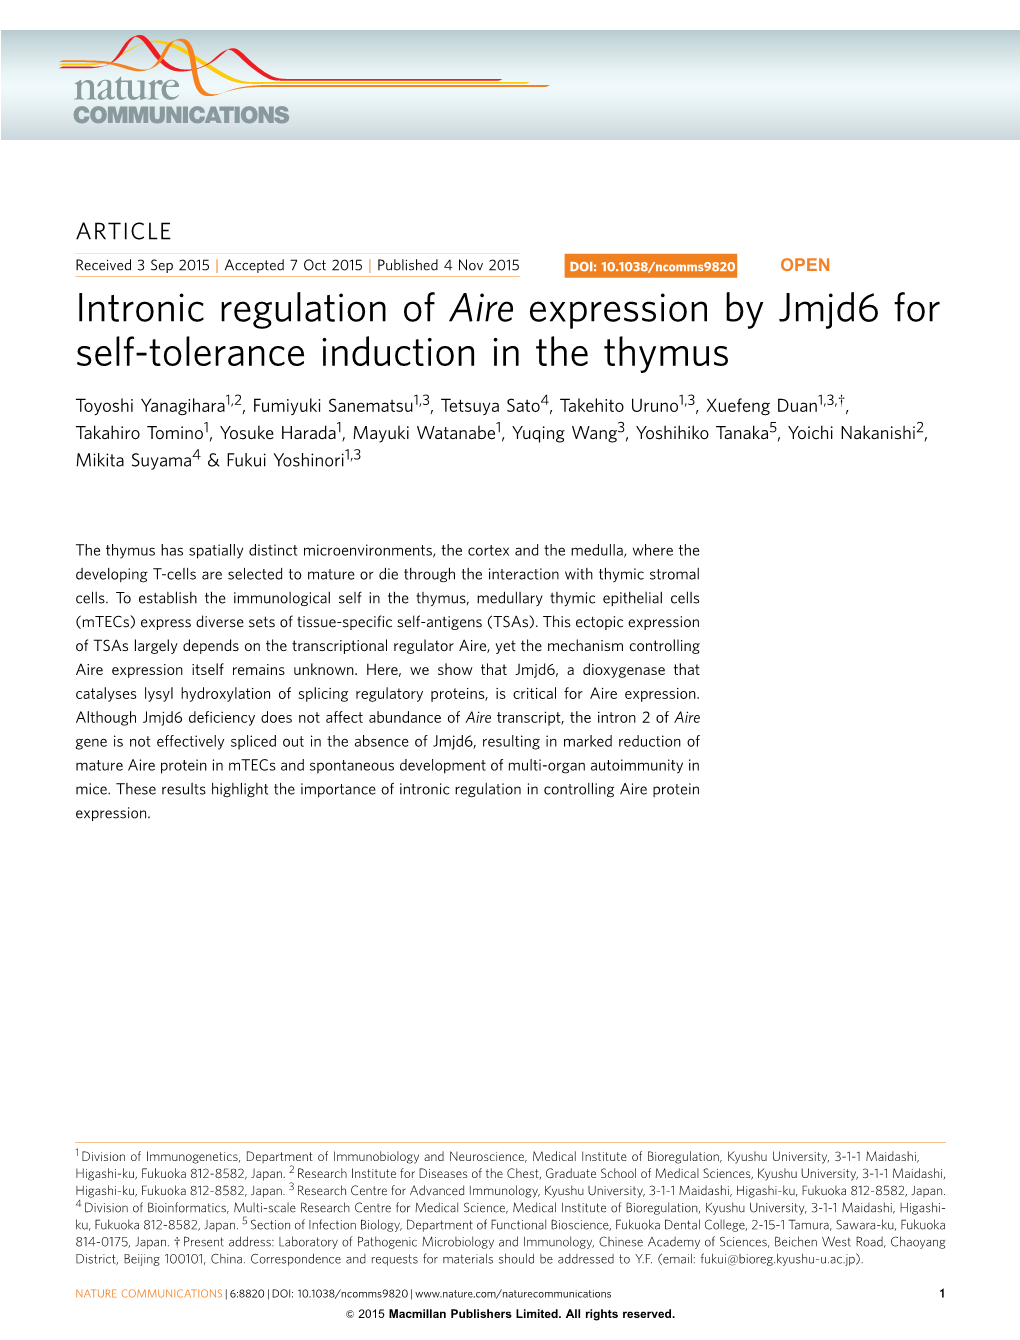 Intronic Regulation of Aire Expression by Jmjd6 for Self-Tolerance Induction in the Thymus